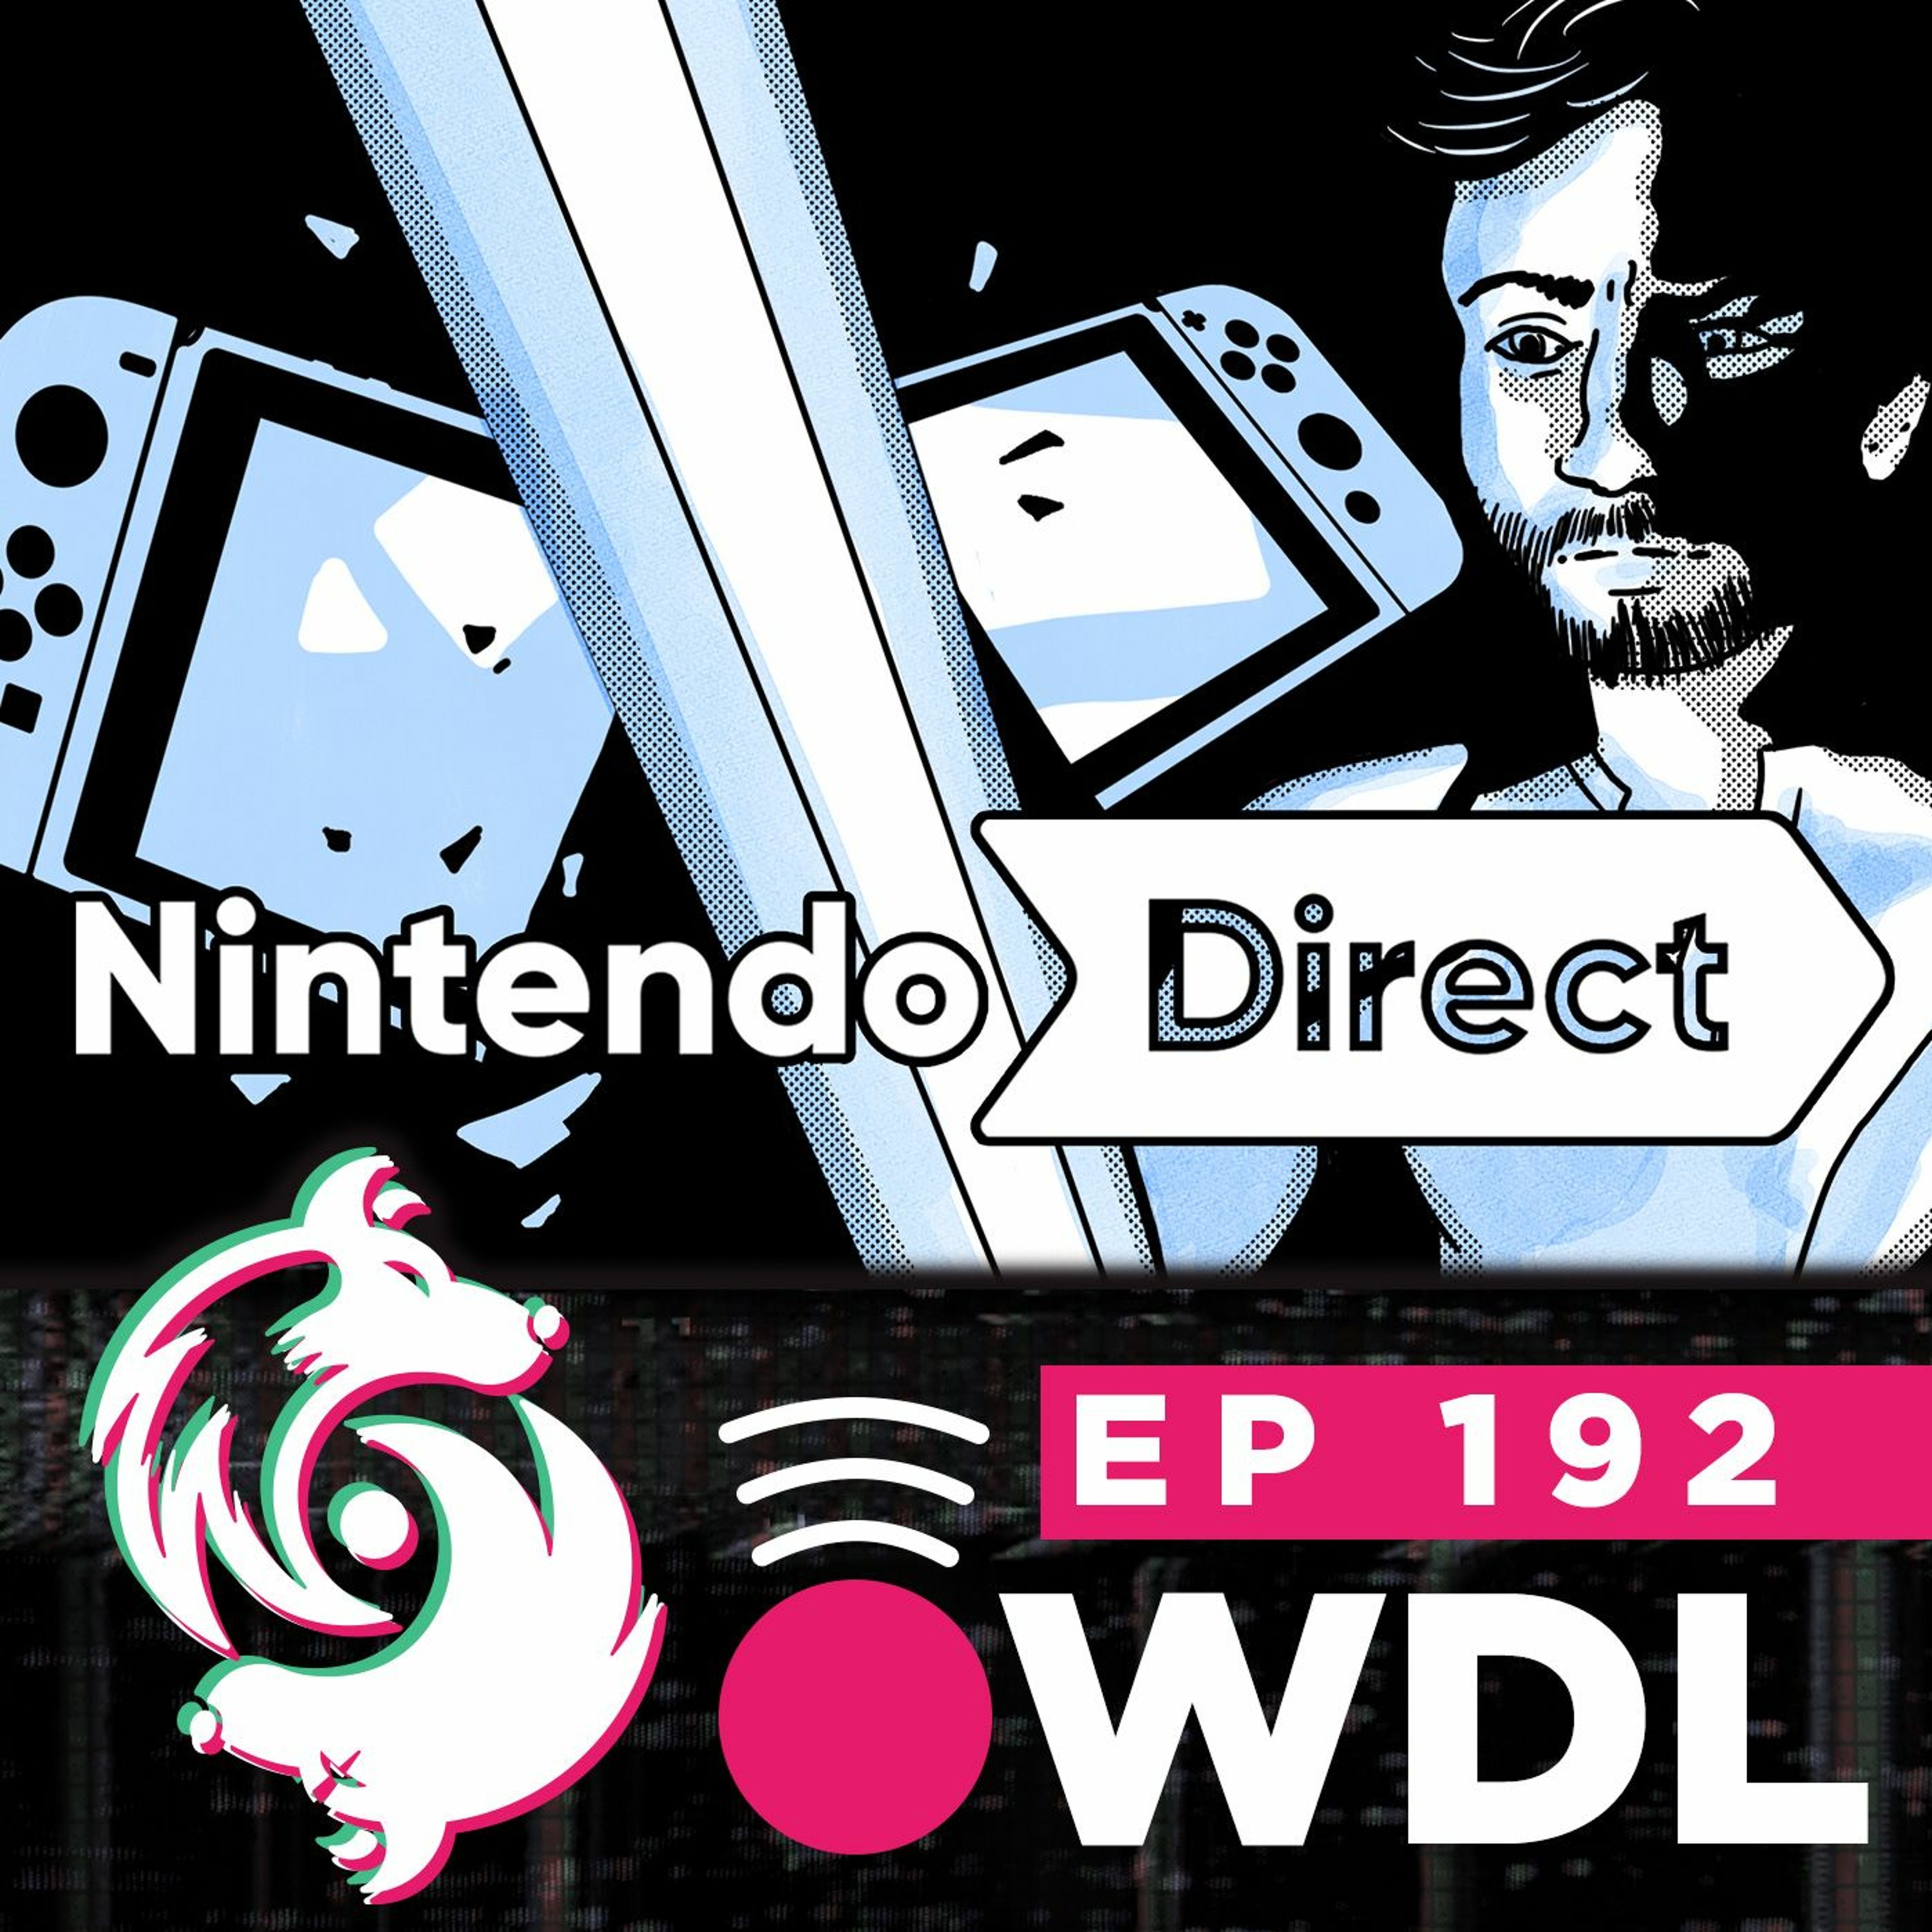 September Nintendo Direct Recap and Reactions (Overwatch, Pokémon, Star Wars & More) - WDL Ep 192